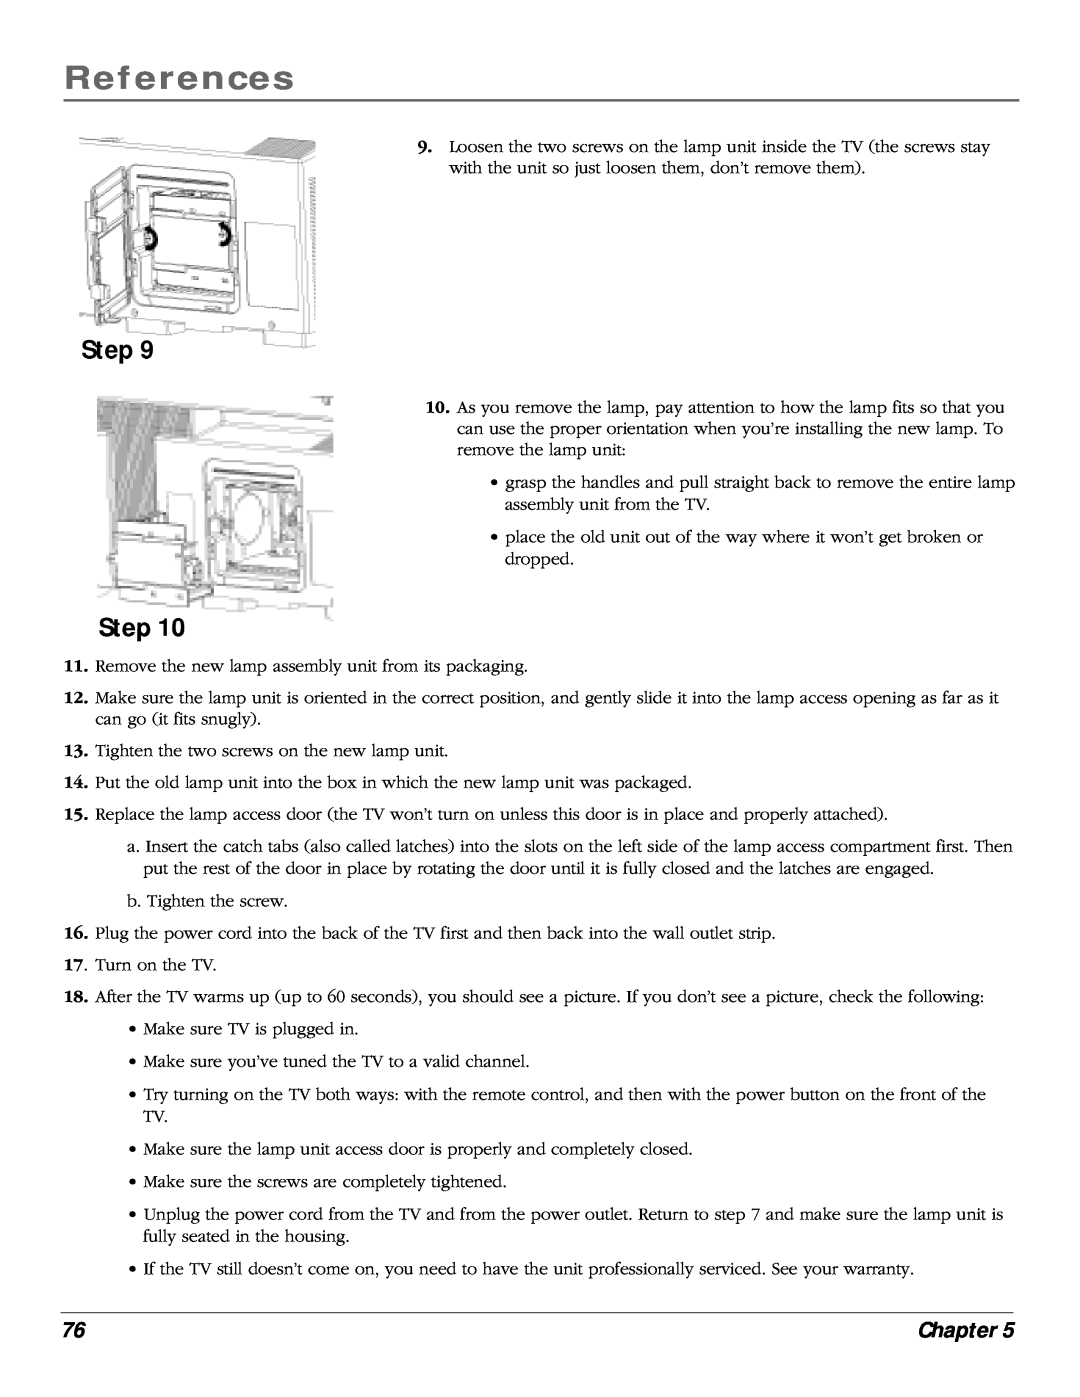 RCA scenium manual References, Step, Chapter, place the old unit out of the way where it won’t get broken or dropped 